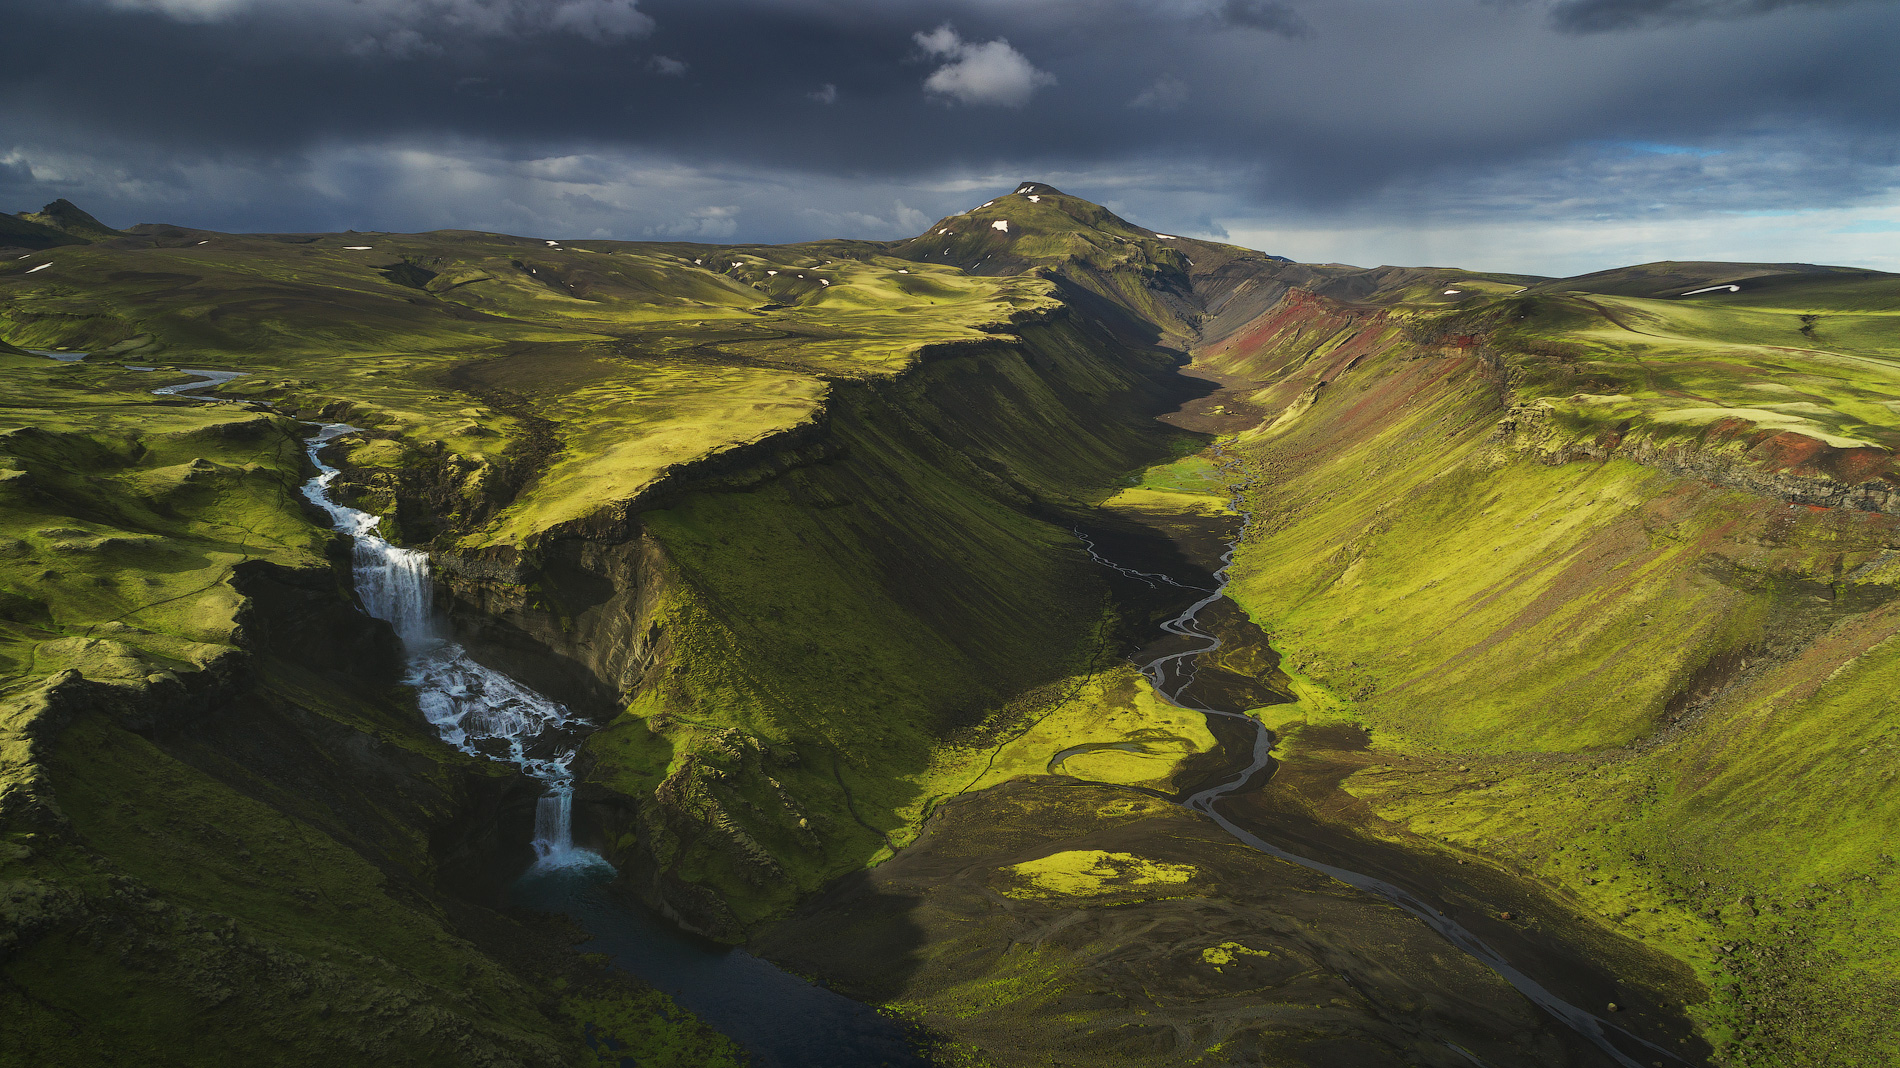 6 Day Photo Workshop Camping in the Icelandic Highlands - day 1